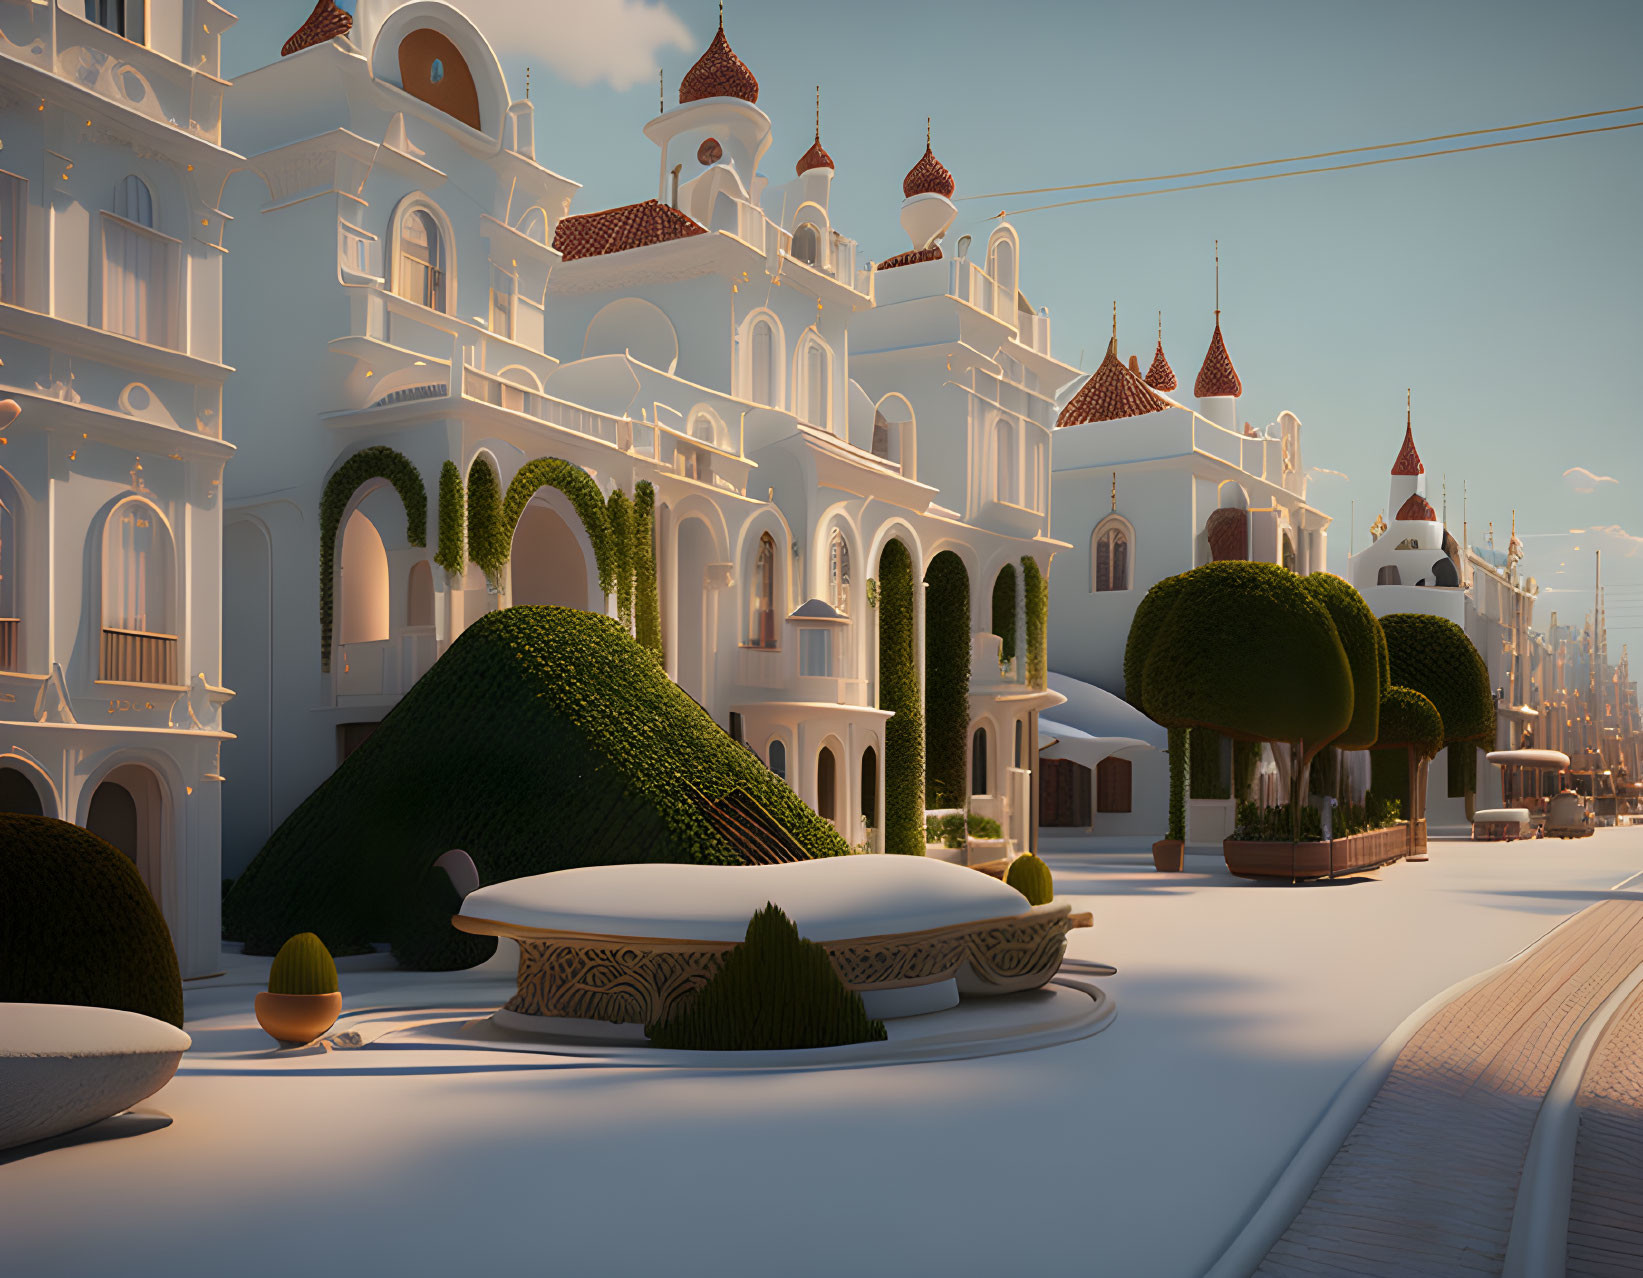 White ornate buildings and dome structures in a fantastical cityscape with vegetation, under warm light.